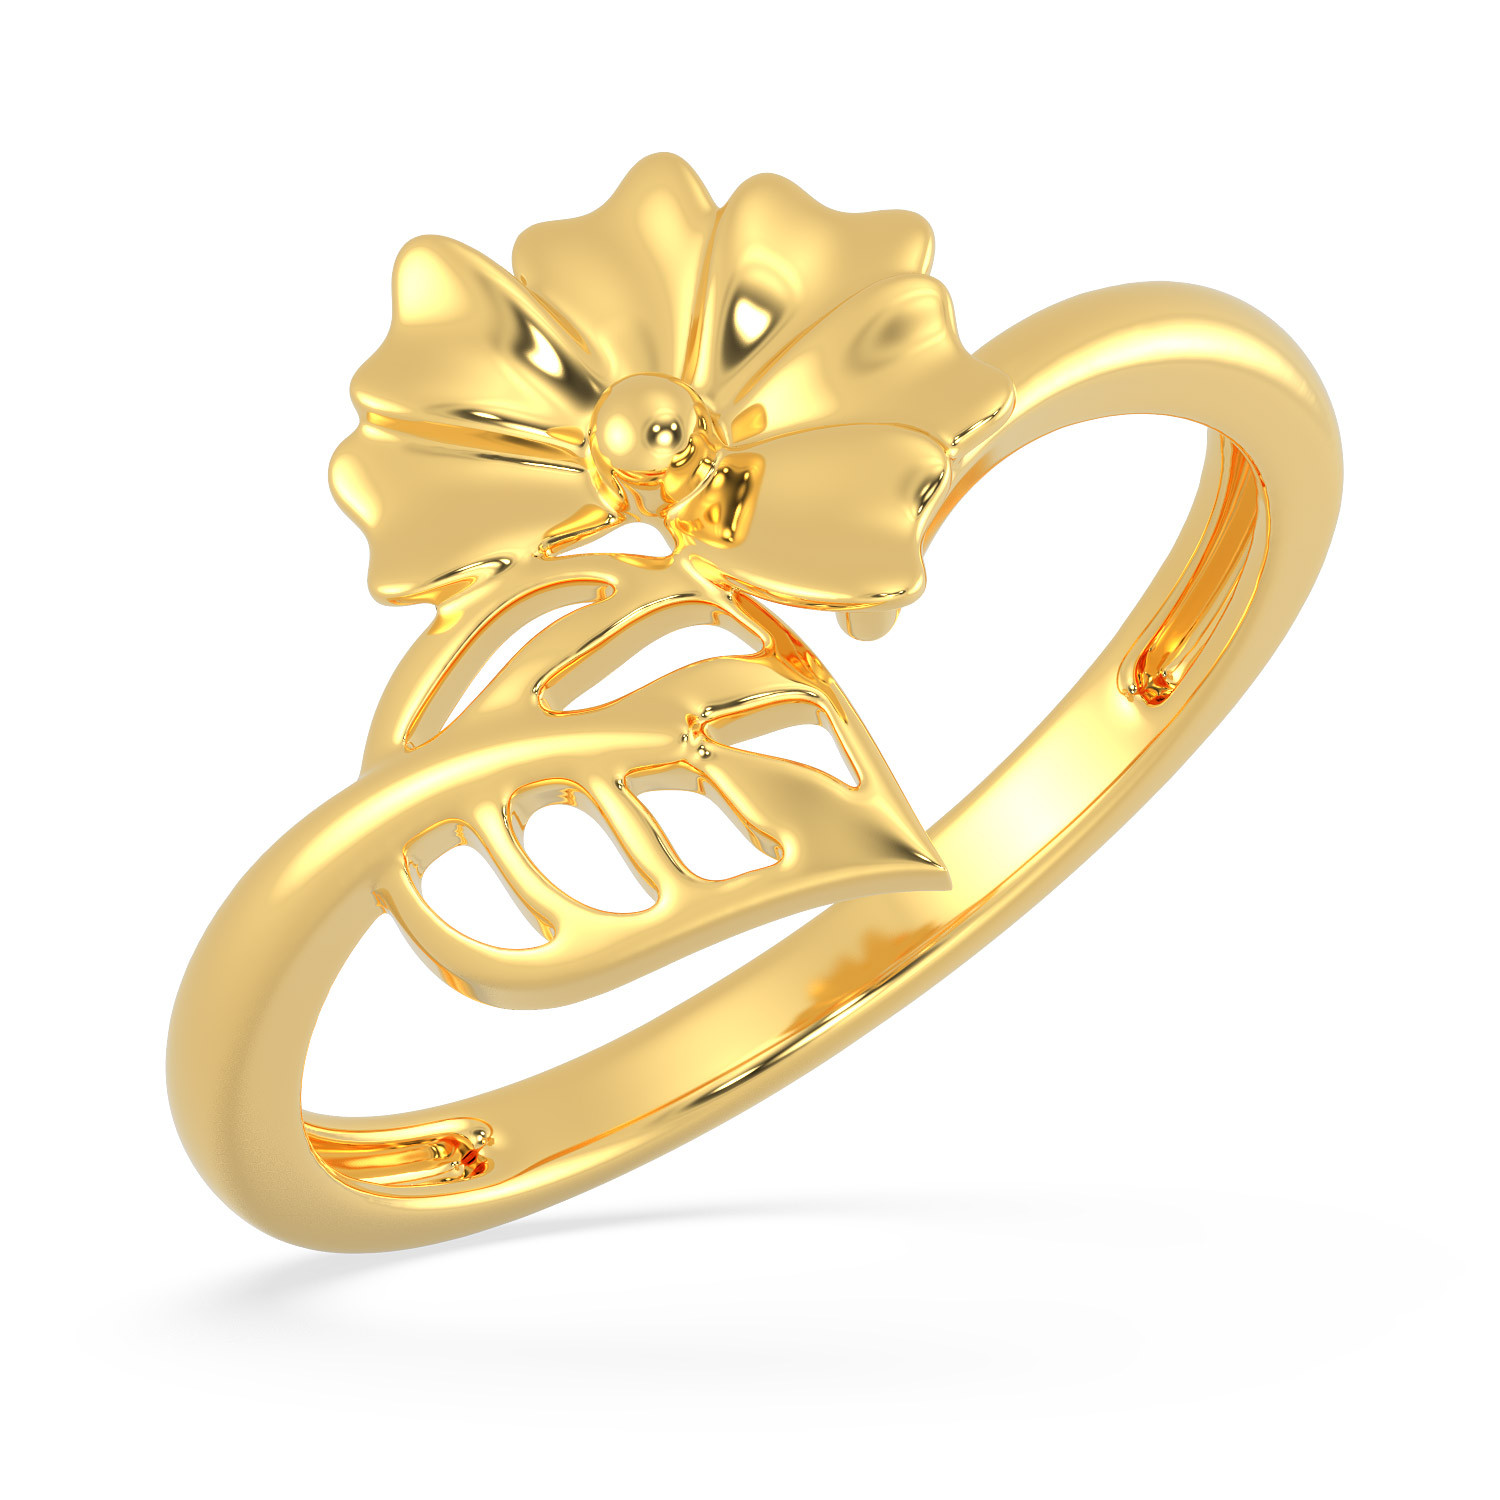 Stunning Geeti Diamond Ring for Under 20K - Candere by Kalyan Jewellers